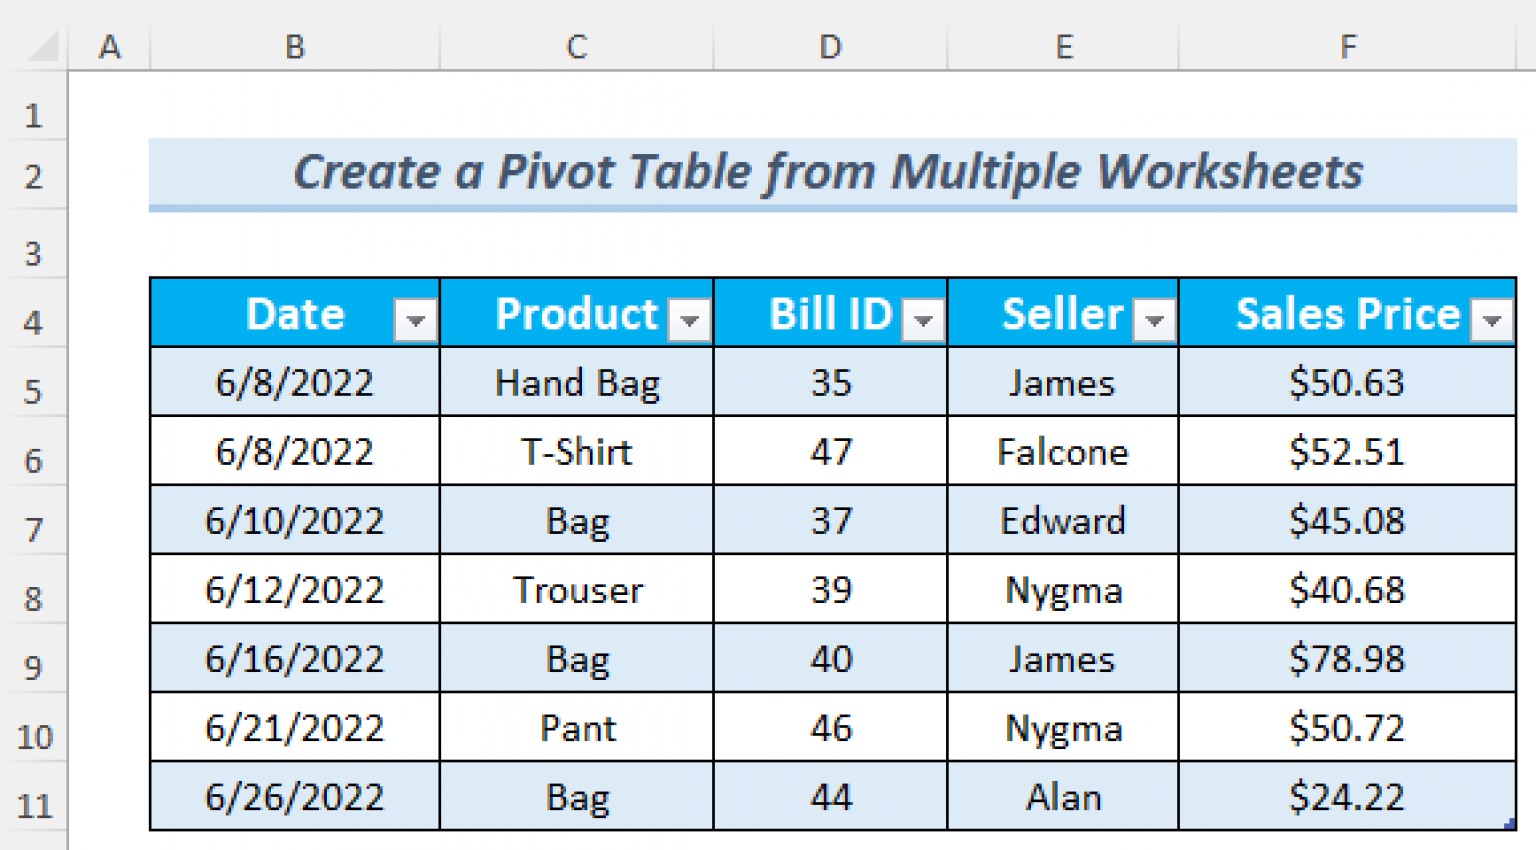 How To Make A Pivot Table From Multiple Worksheets